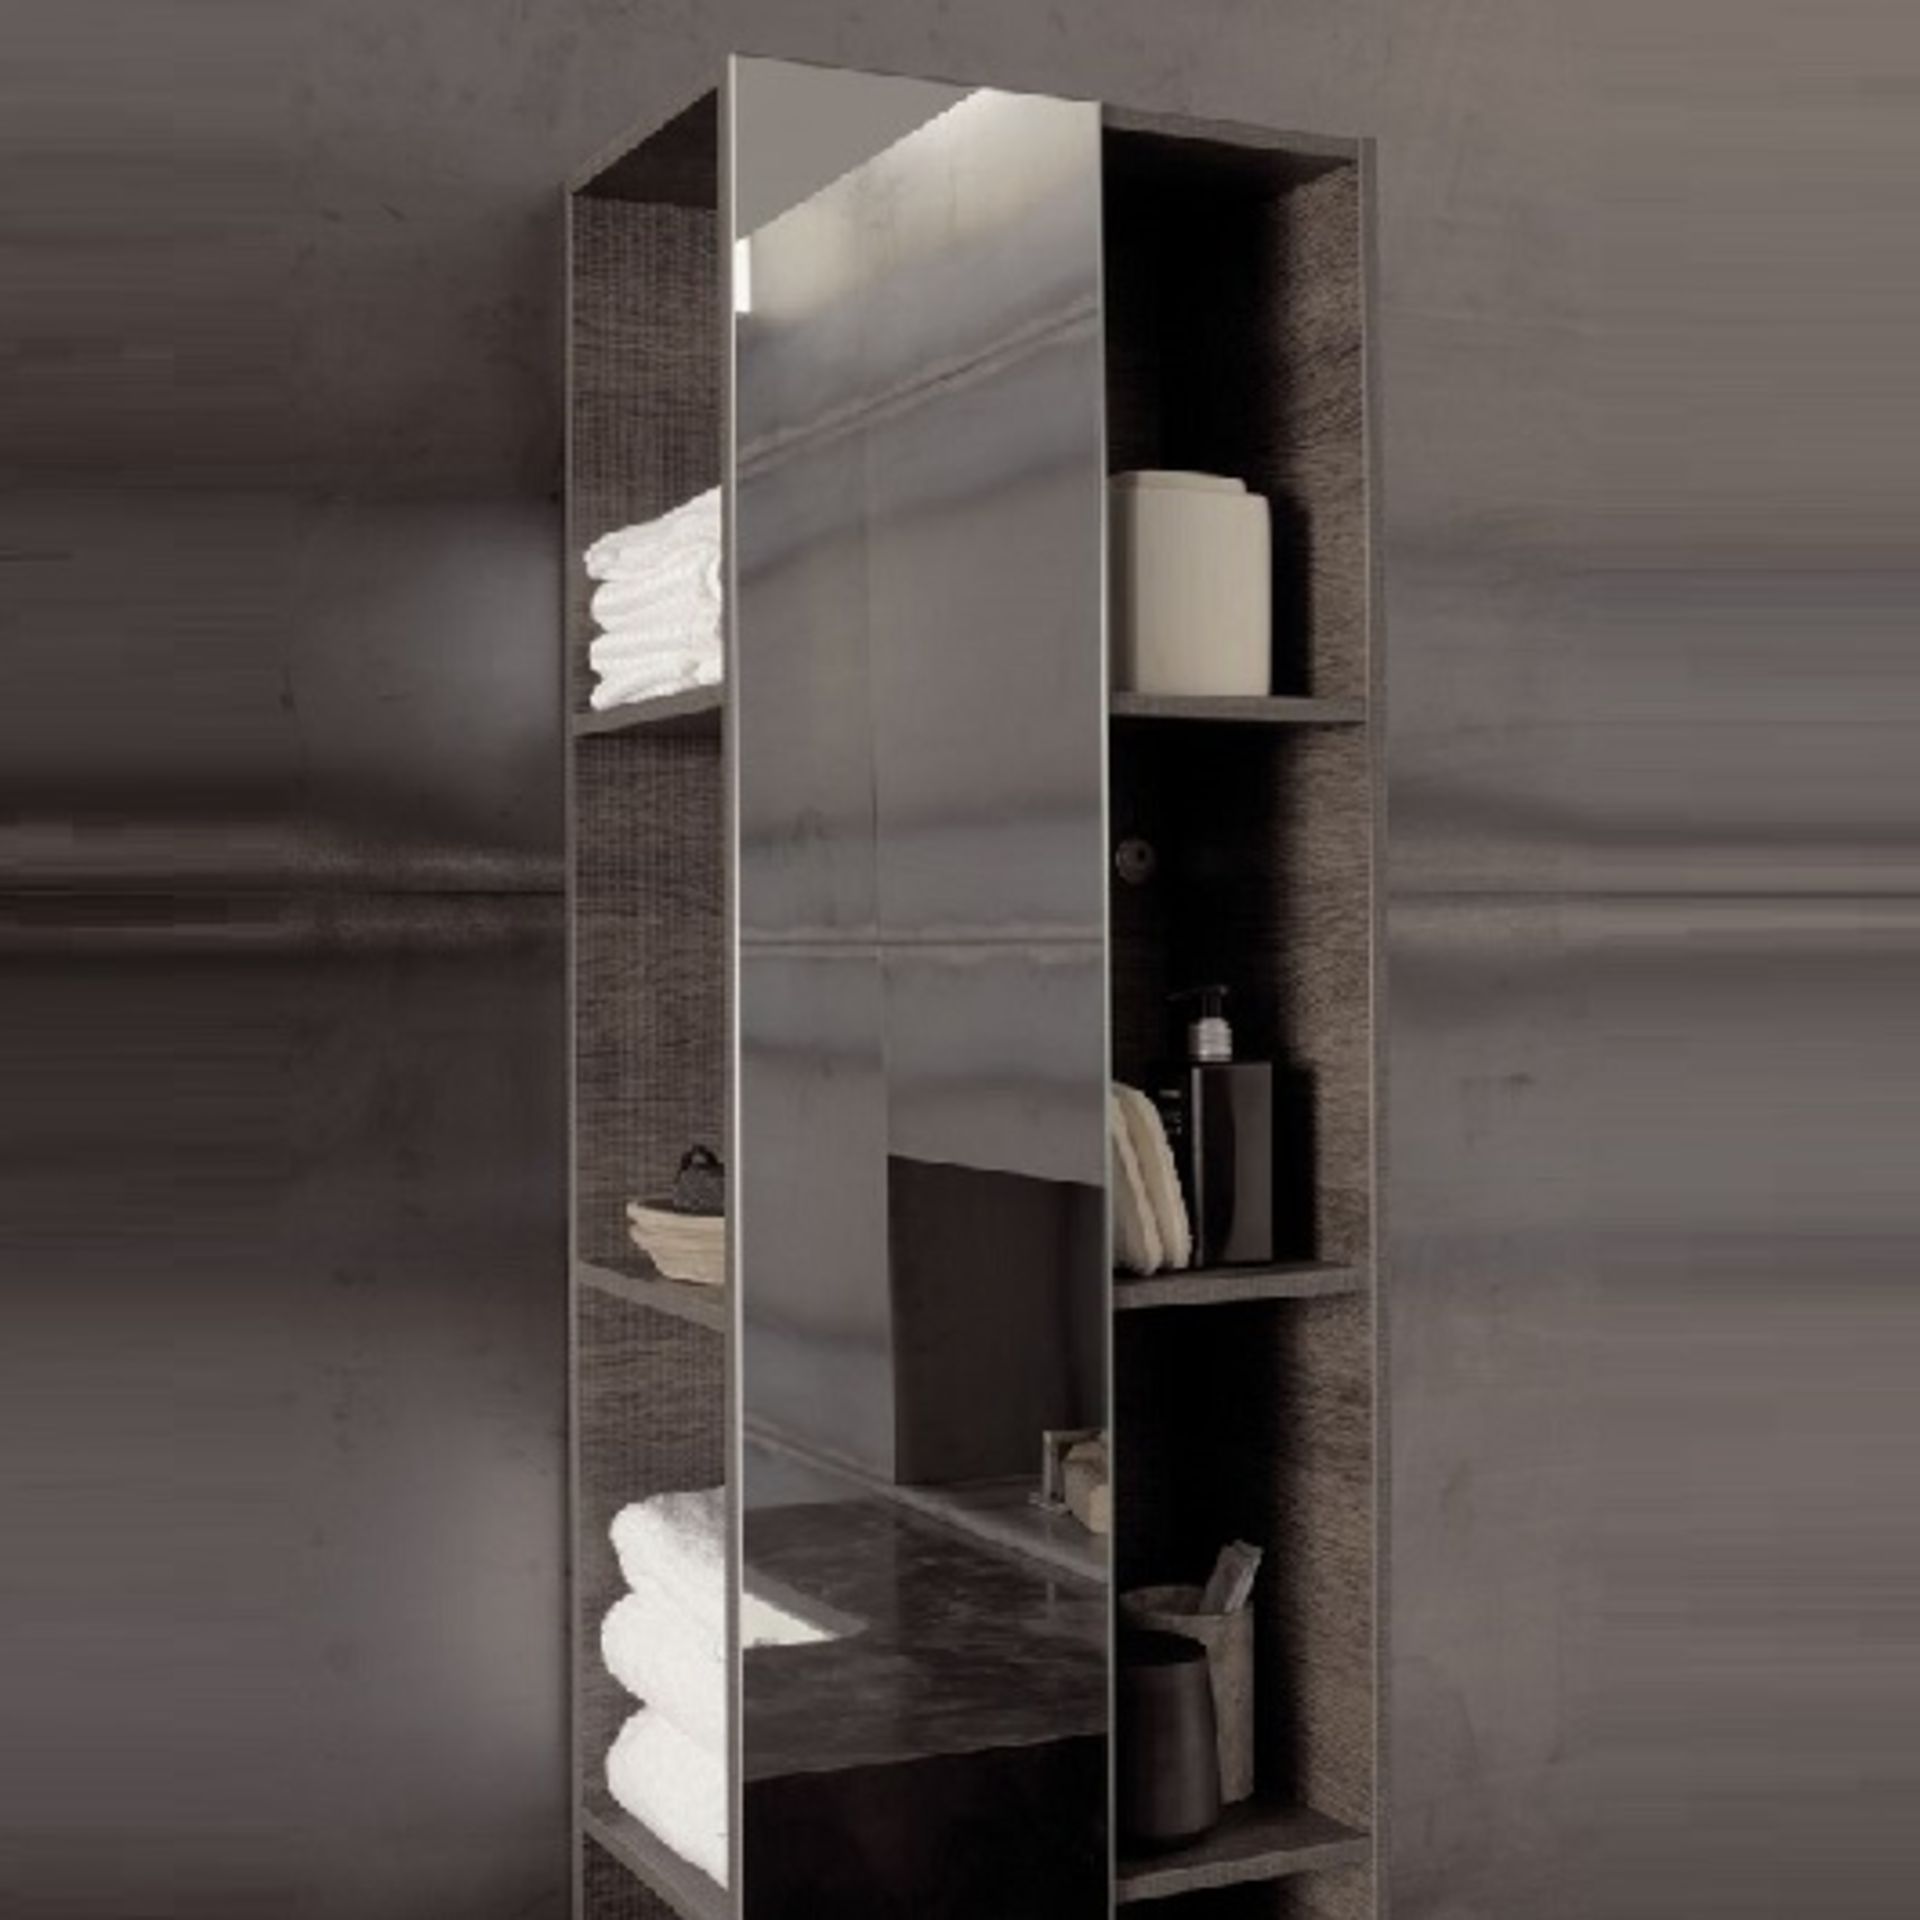 (XL140) Keramag Citterio Grey/Brown Shelves with Mirror Tall Cabinet. RRP £865.99. Wood struc...( - Image 2 of 3